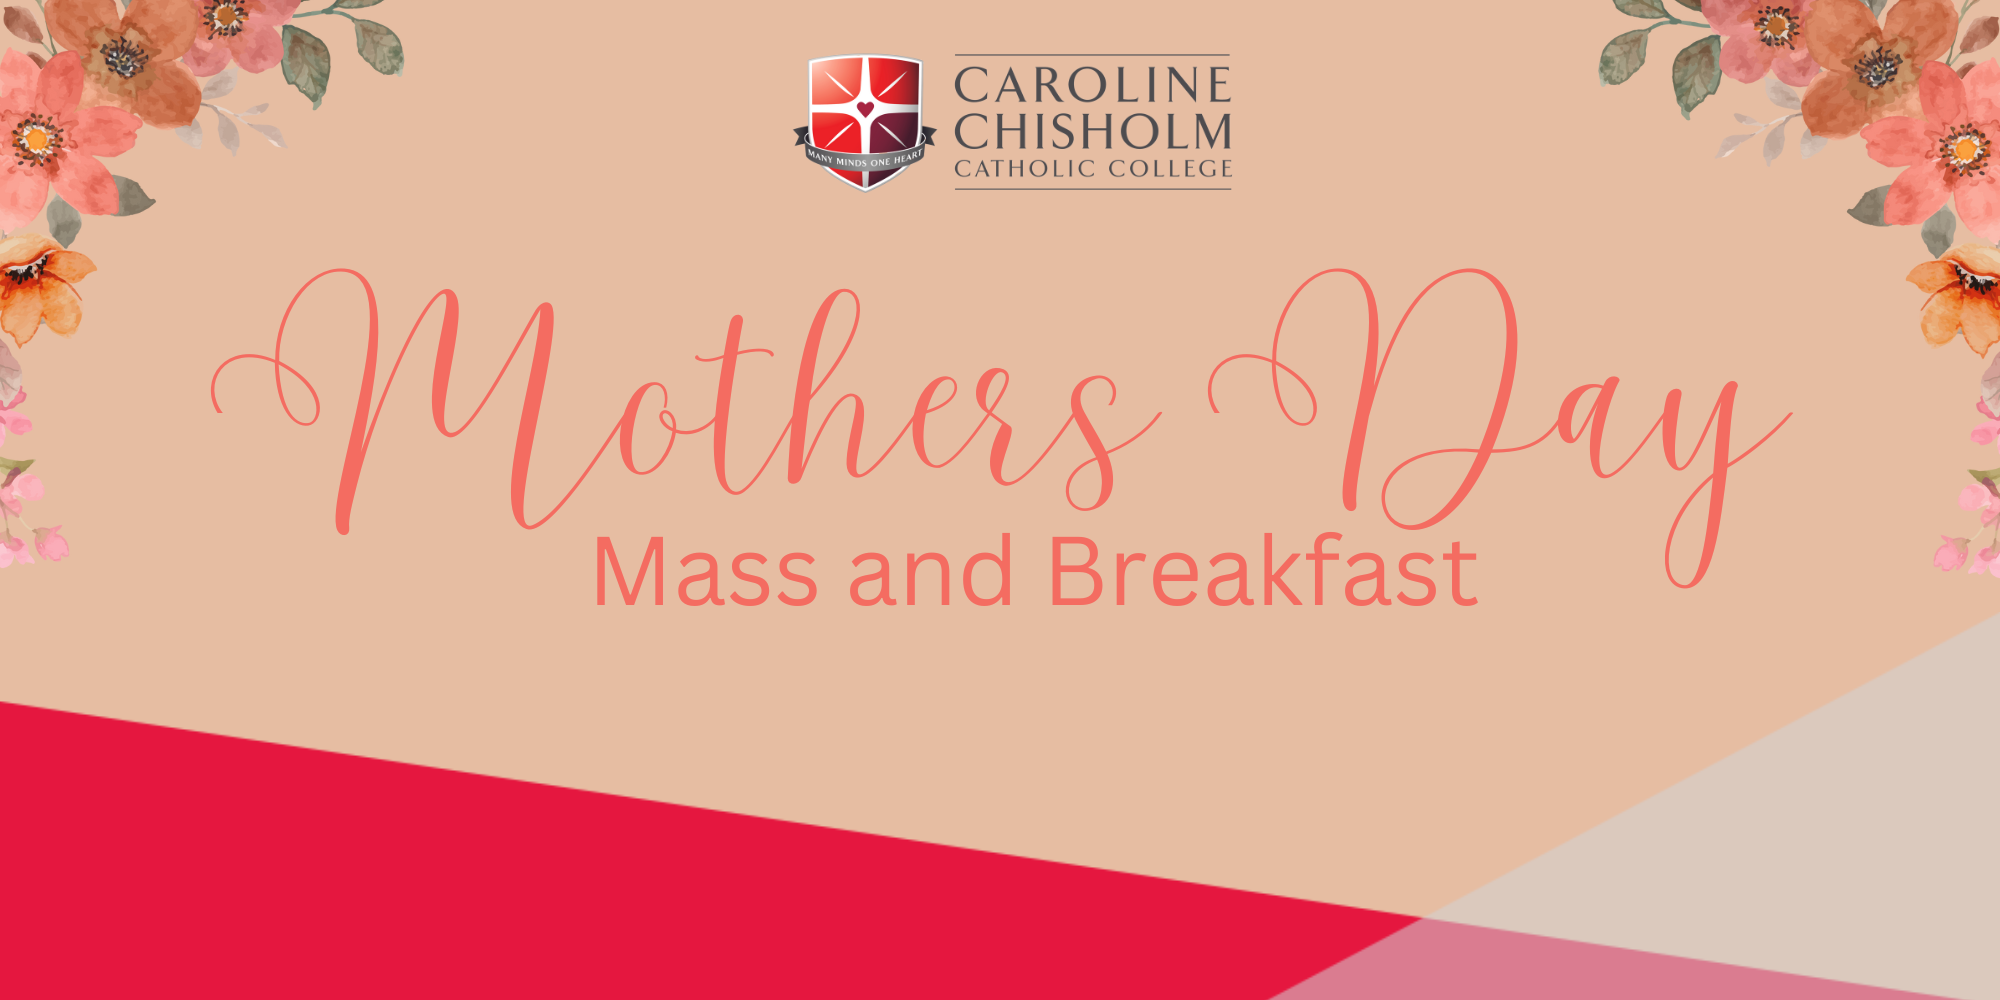 Mother's Day Mass and Breakfast with Caroline Chisholm Catholic College